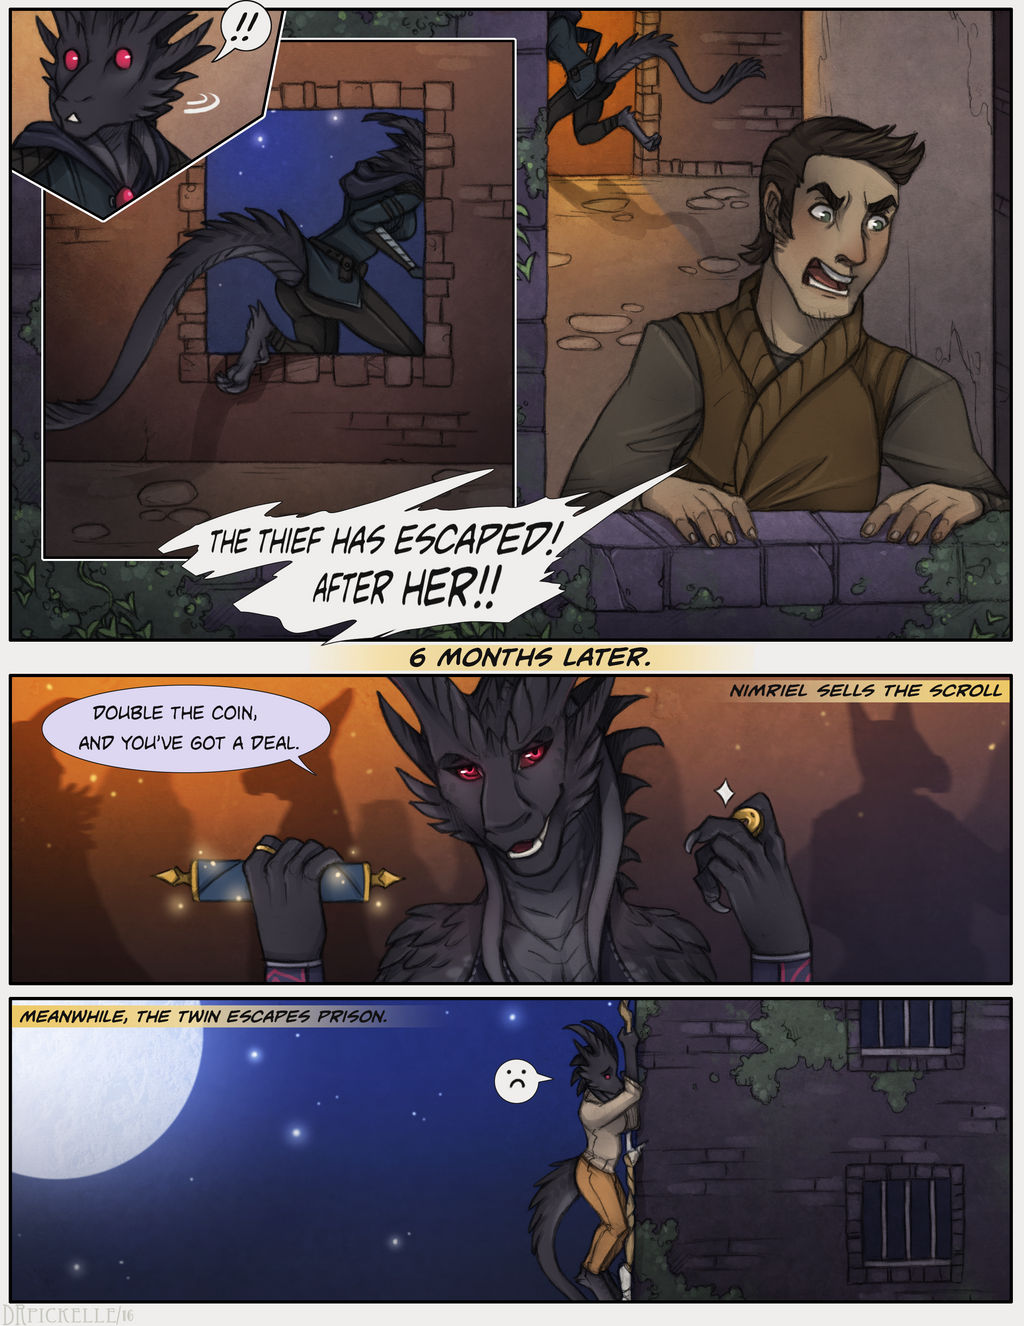 The meaning of raid by TasanPegasus on DeviantArt